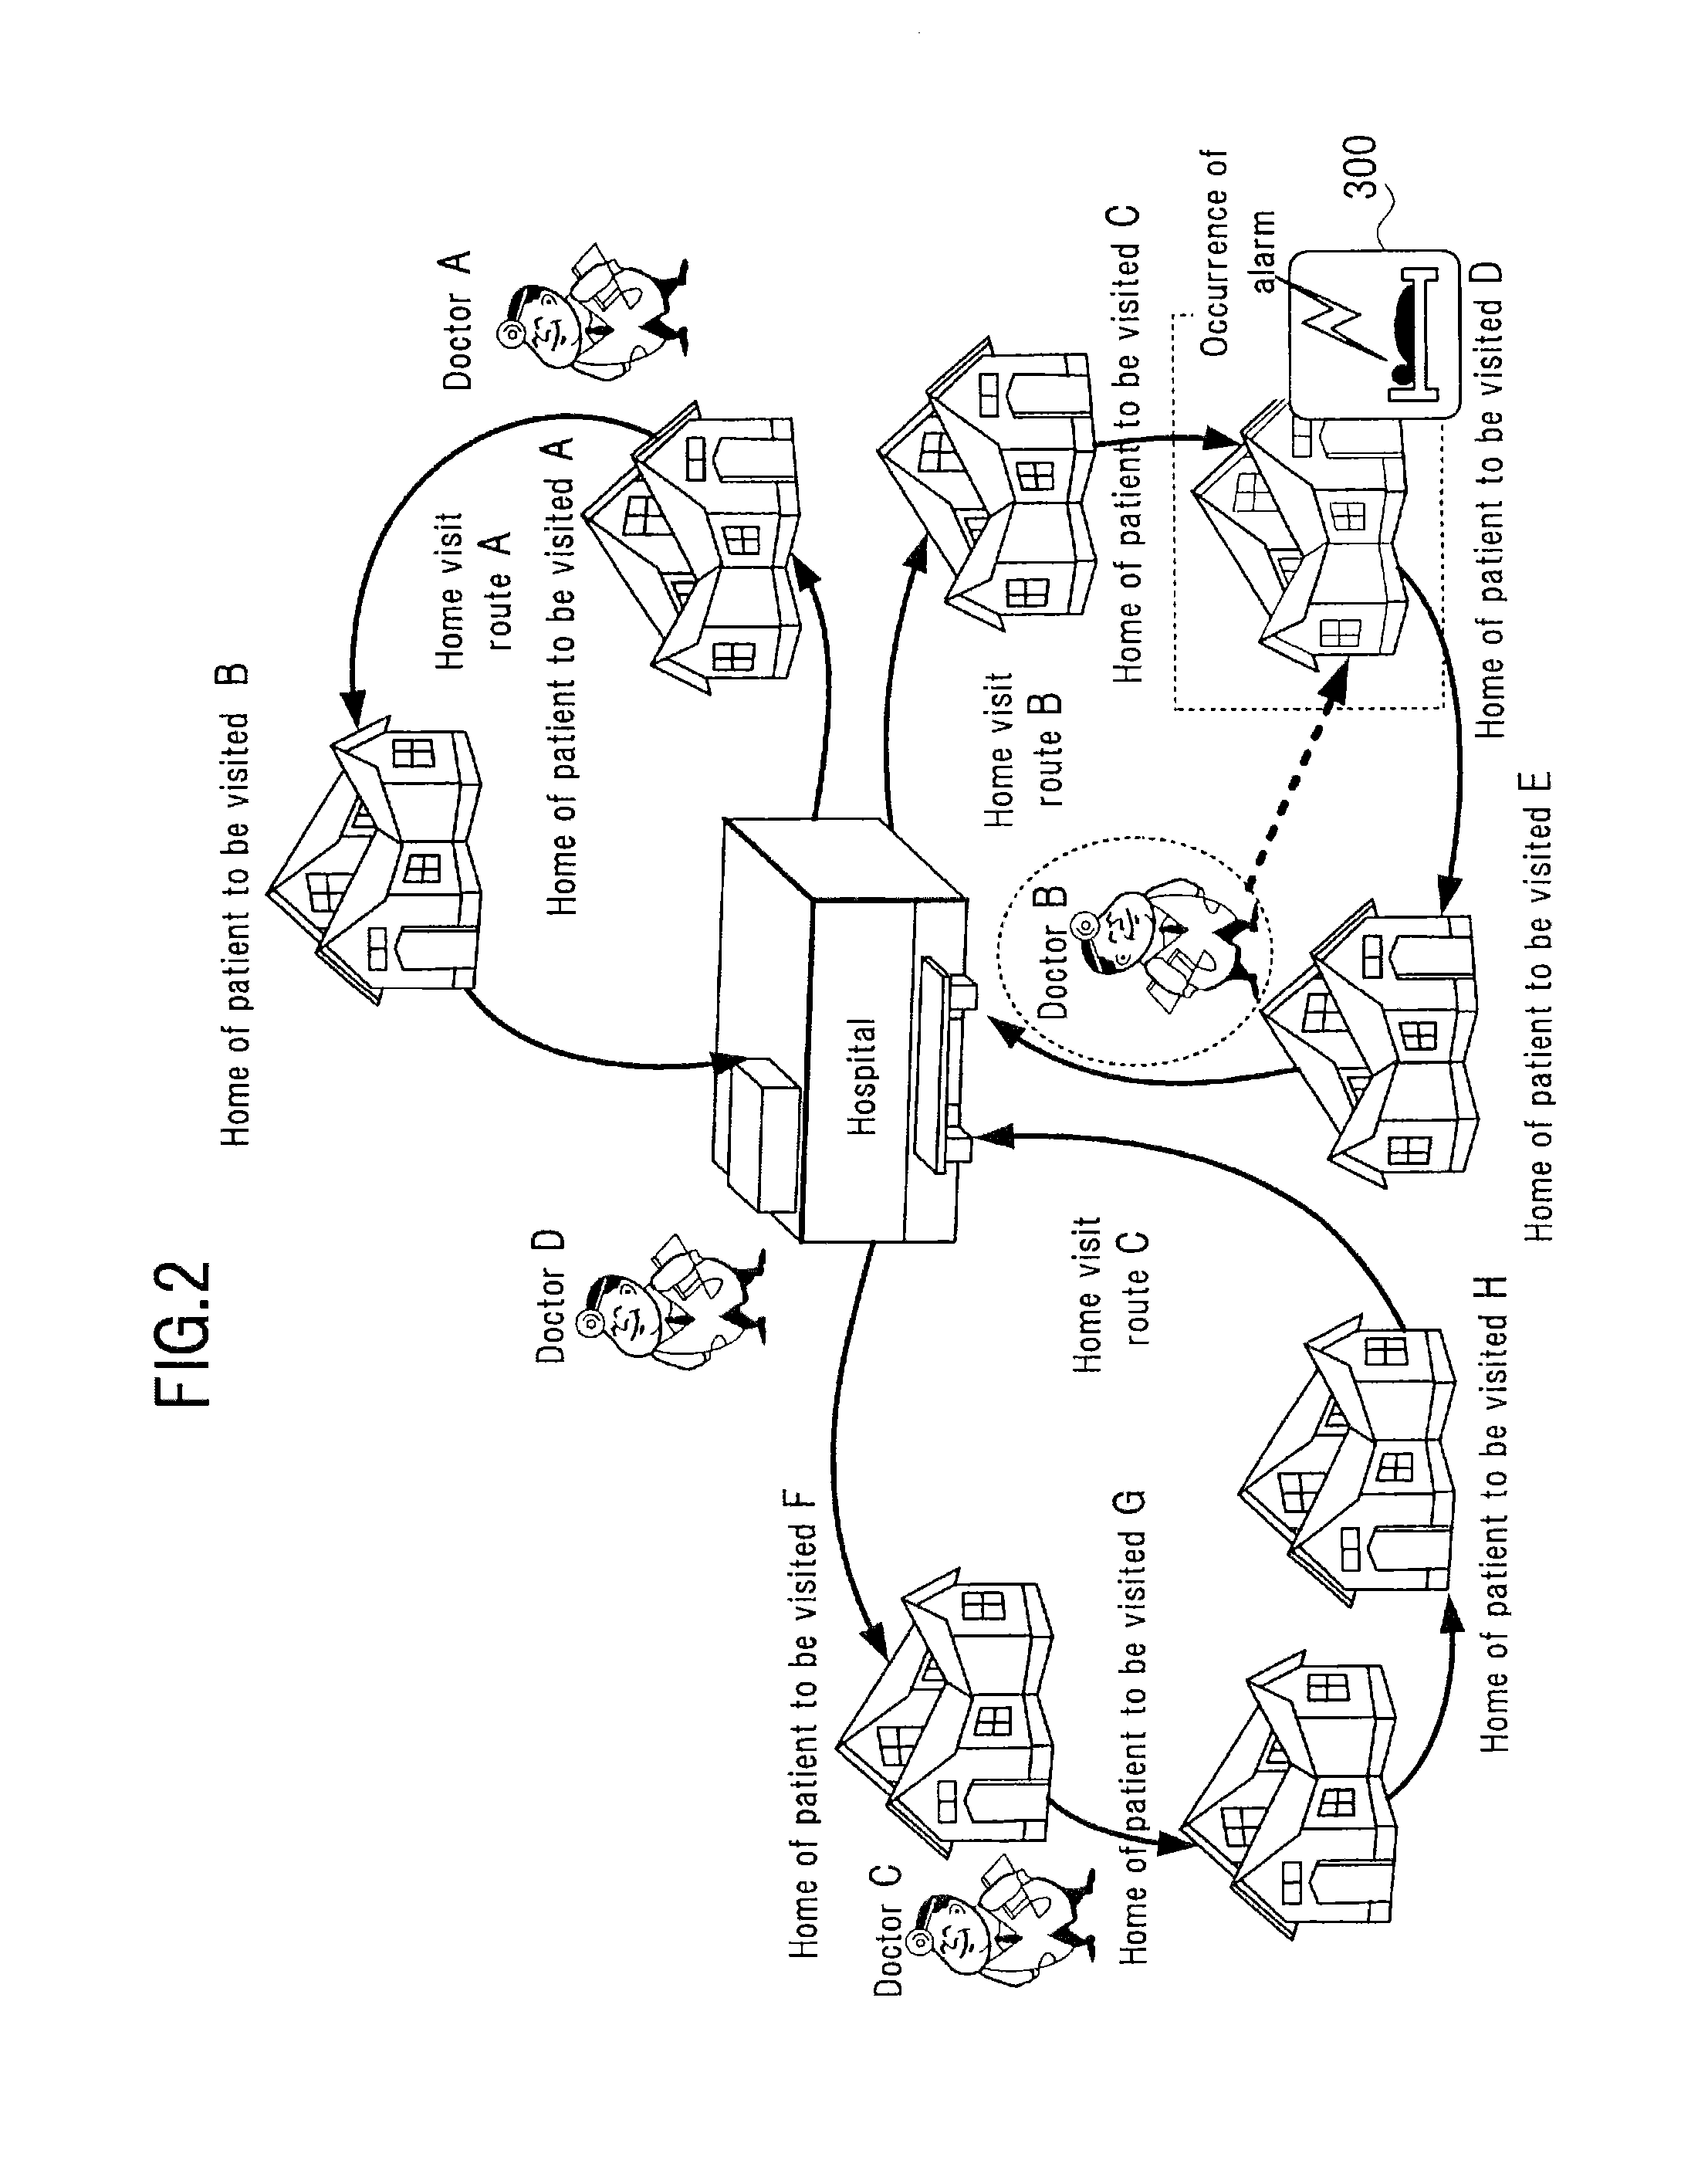 Home medical care support apparatus and home medical care support system